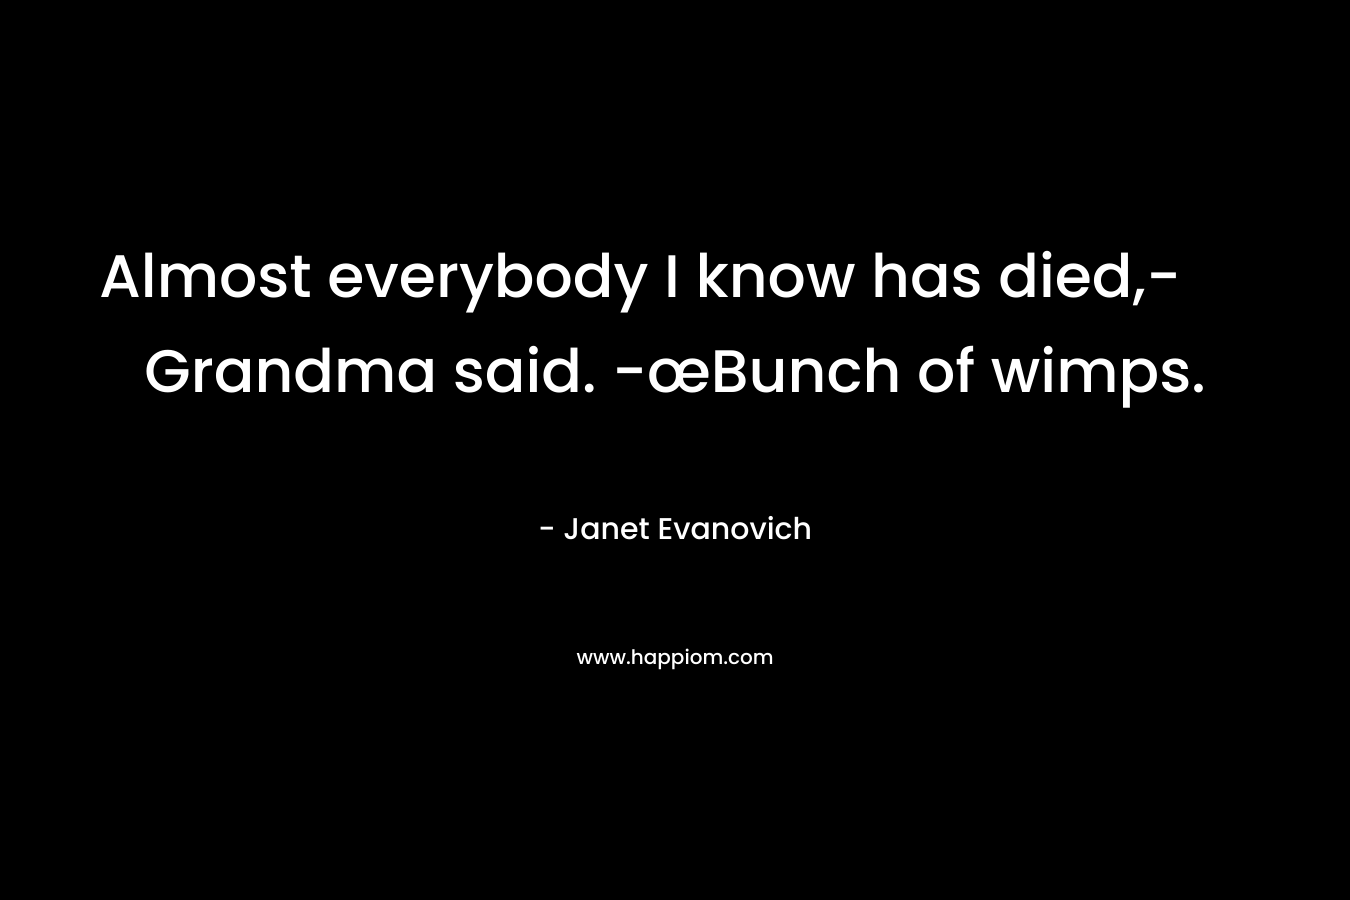 Almost everybody I know has died,- Grandma said. -œBunch of wimps. – Janet Evanovich